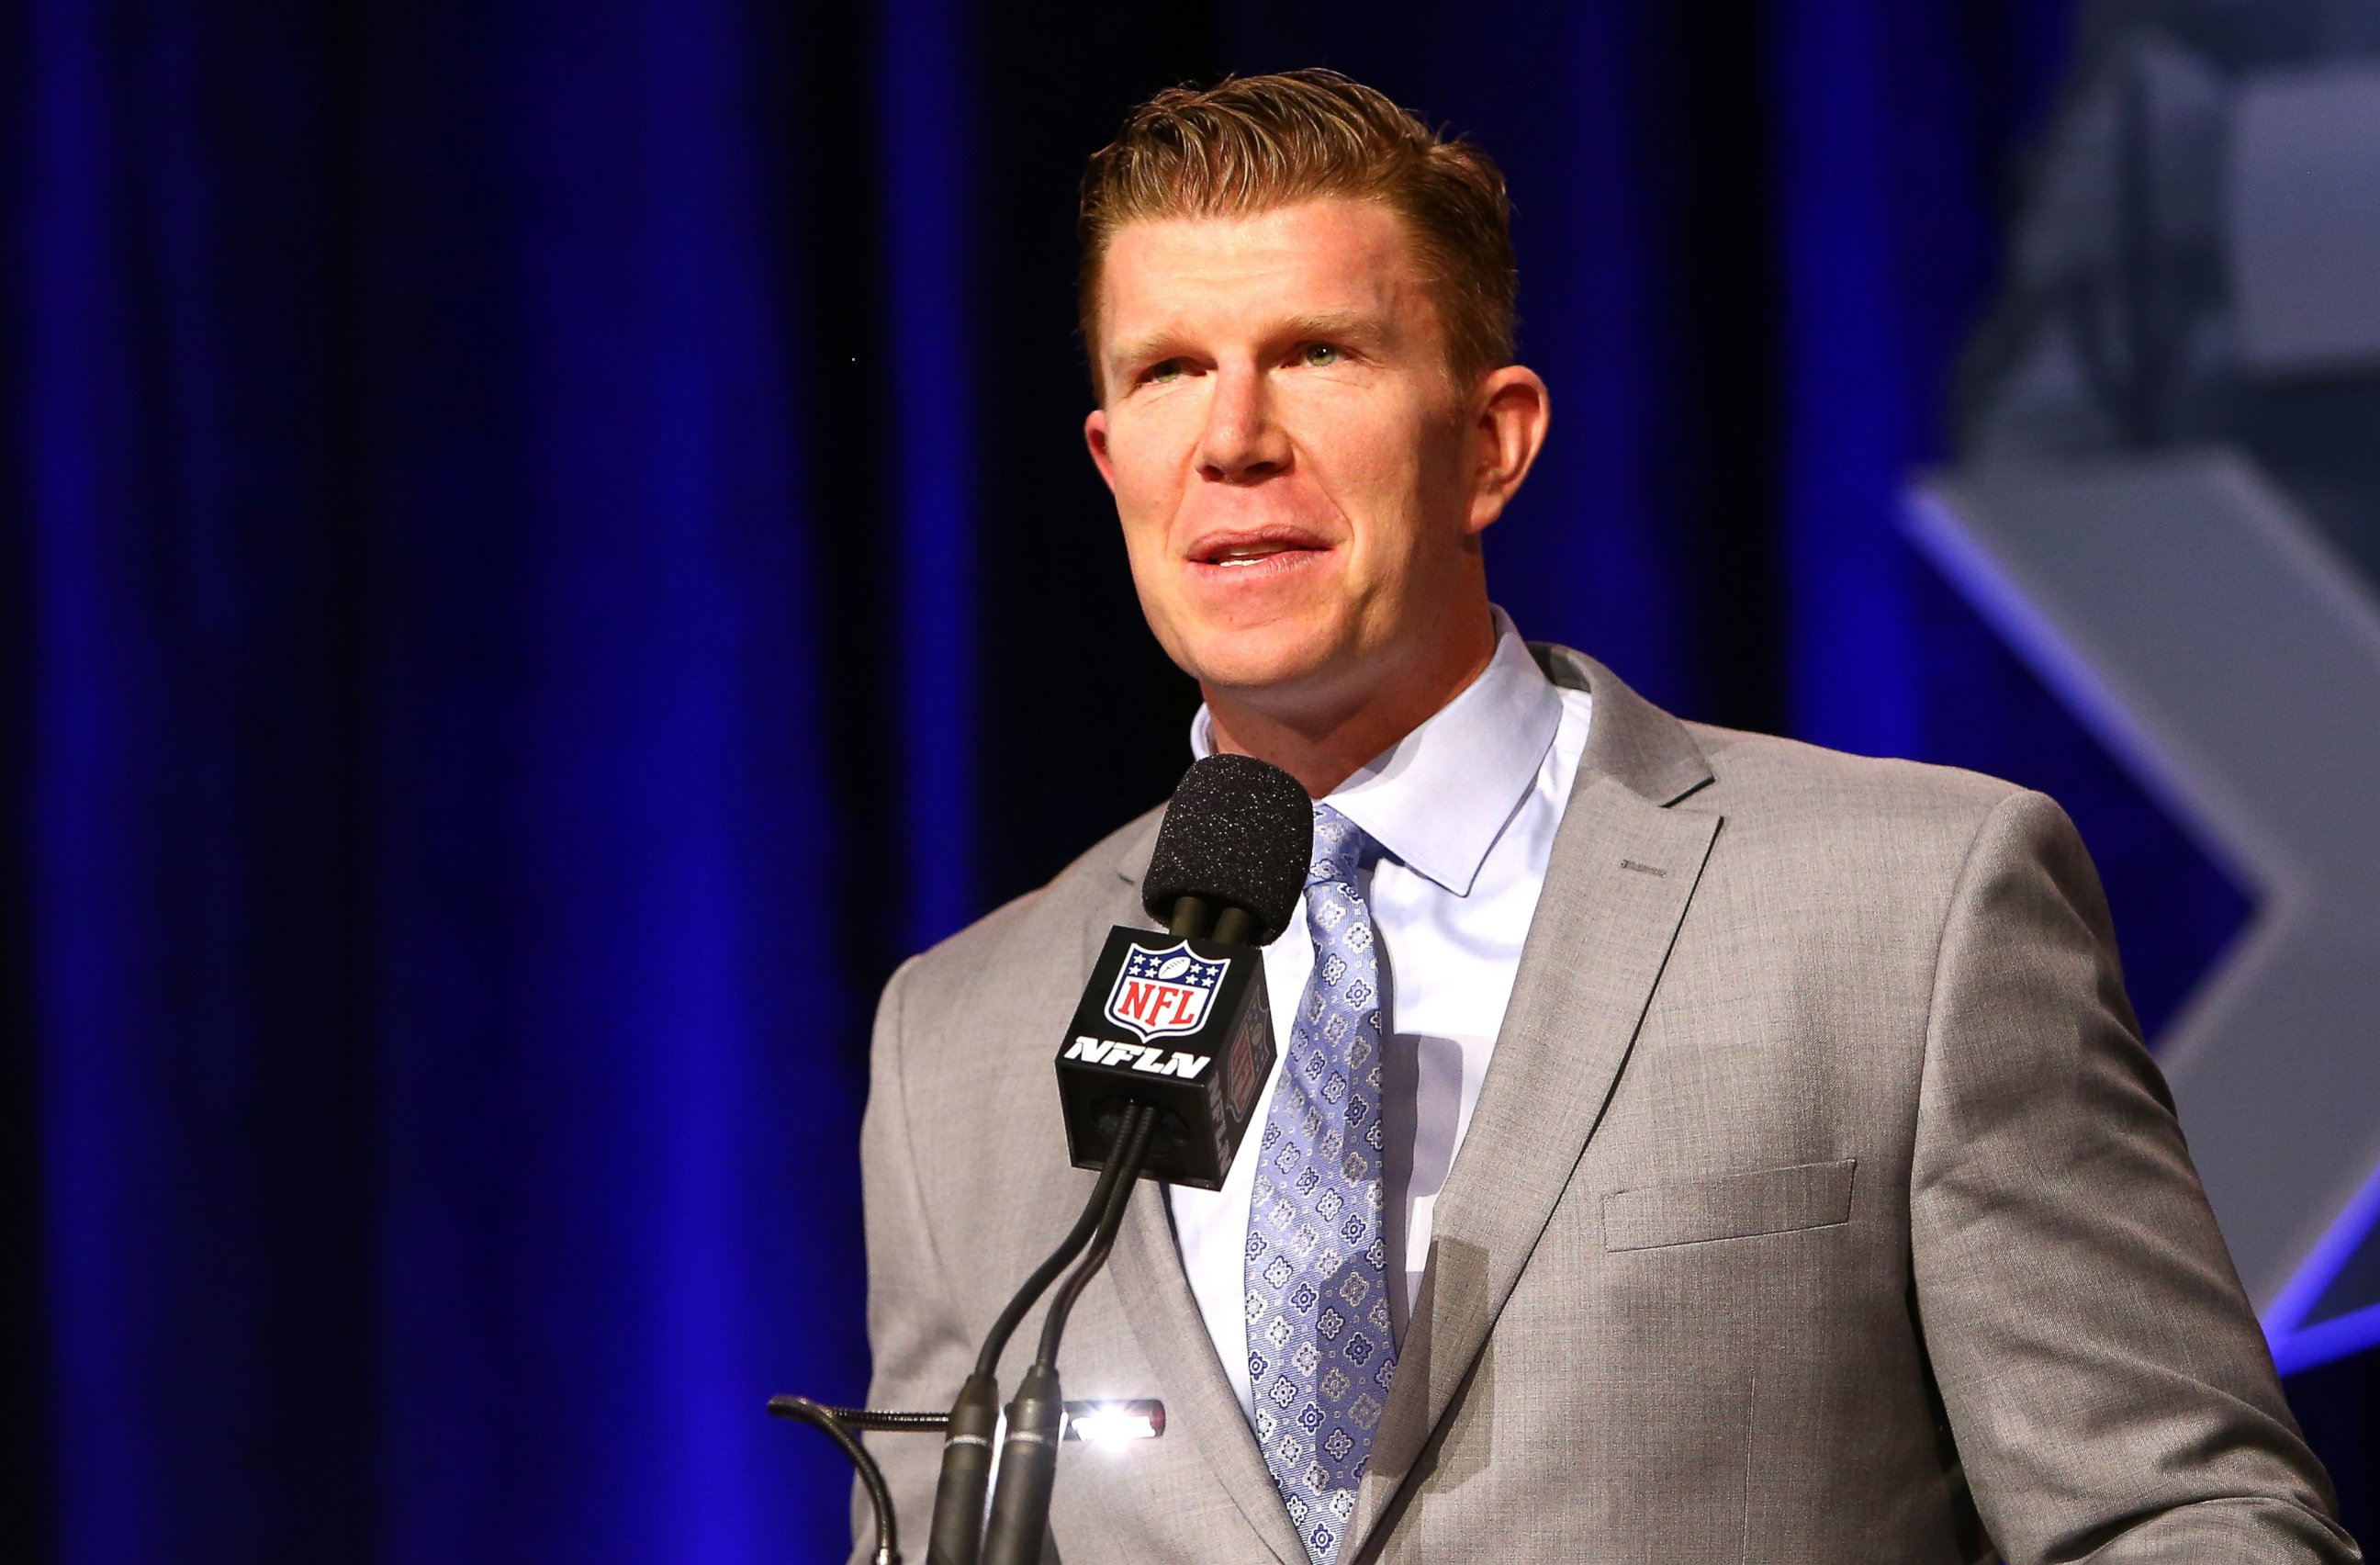 PHOTO: Former NFL player Matt Birk speaks during the Don Shula High School Coach Of The Year Press Conference prior to the upcoming Super Bowl XLIX at Phoenix Convention Center on January 30, 2015 in Phoenix, Arizona.  